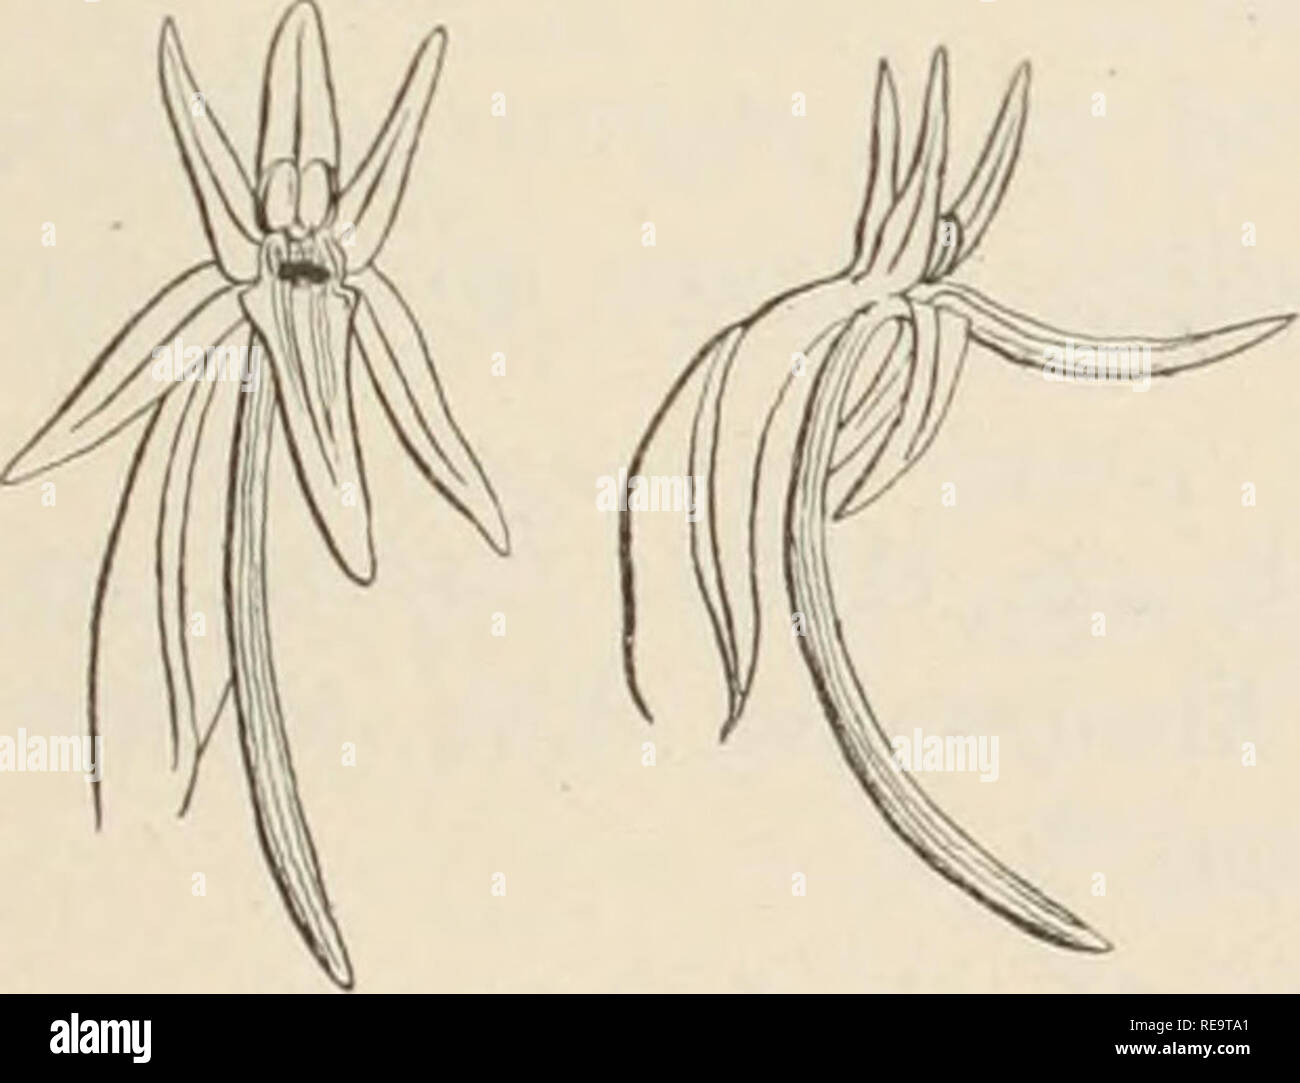 . Contributions from the New York Botanical Garden. Plants. Fig. 2S. 3. Piperia lancifolia sp. nov. Stem stout, 3-5 dm. high, the lower portion leafy; basal leaves and lower stem-leaves lanceolate, attenuate, 10-15 cm. long, 1-2 cm. wide, withering after anthesis : spike many-flowered, but lax, 2-3 dm. long; bracts ovate, acute, striate, about two-thirds as long as the flowers, or the lower almost equalling them : flowers greenish, 11-13 mm. long: upper sepal ovate, obtuse, about 4 mm. long ; the lateral ones slightly longer, oblong-lanceolate: petals lanceolate, obtusish, oblique at the base; Stock Photo